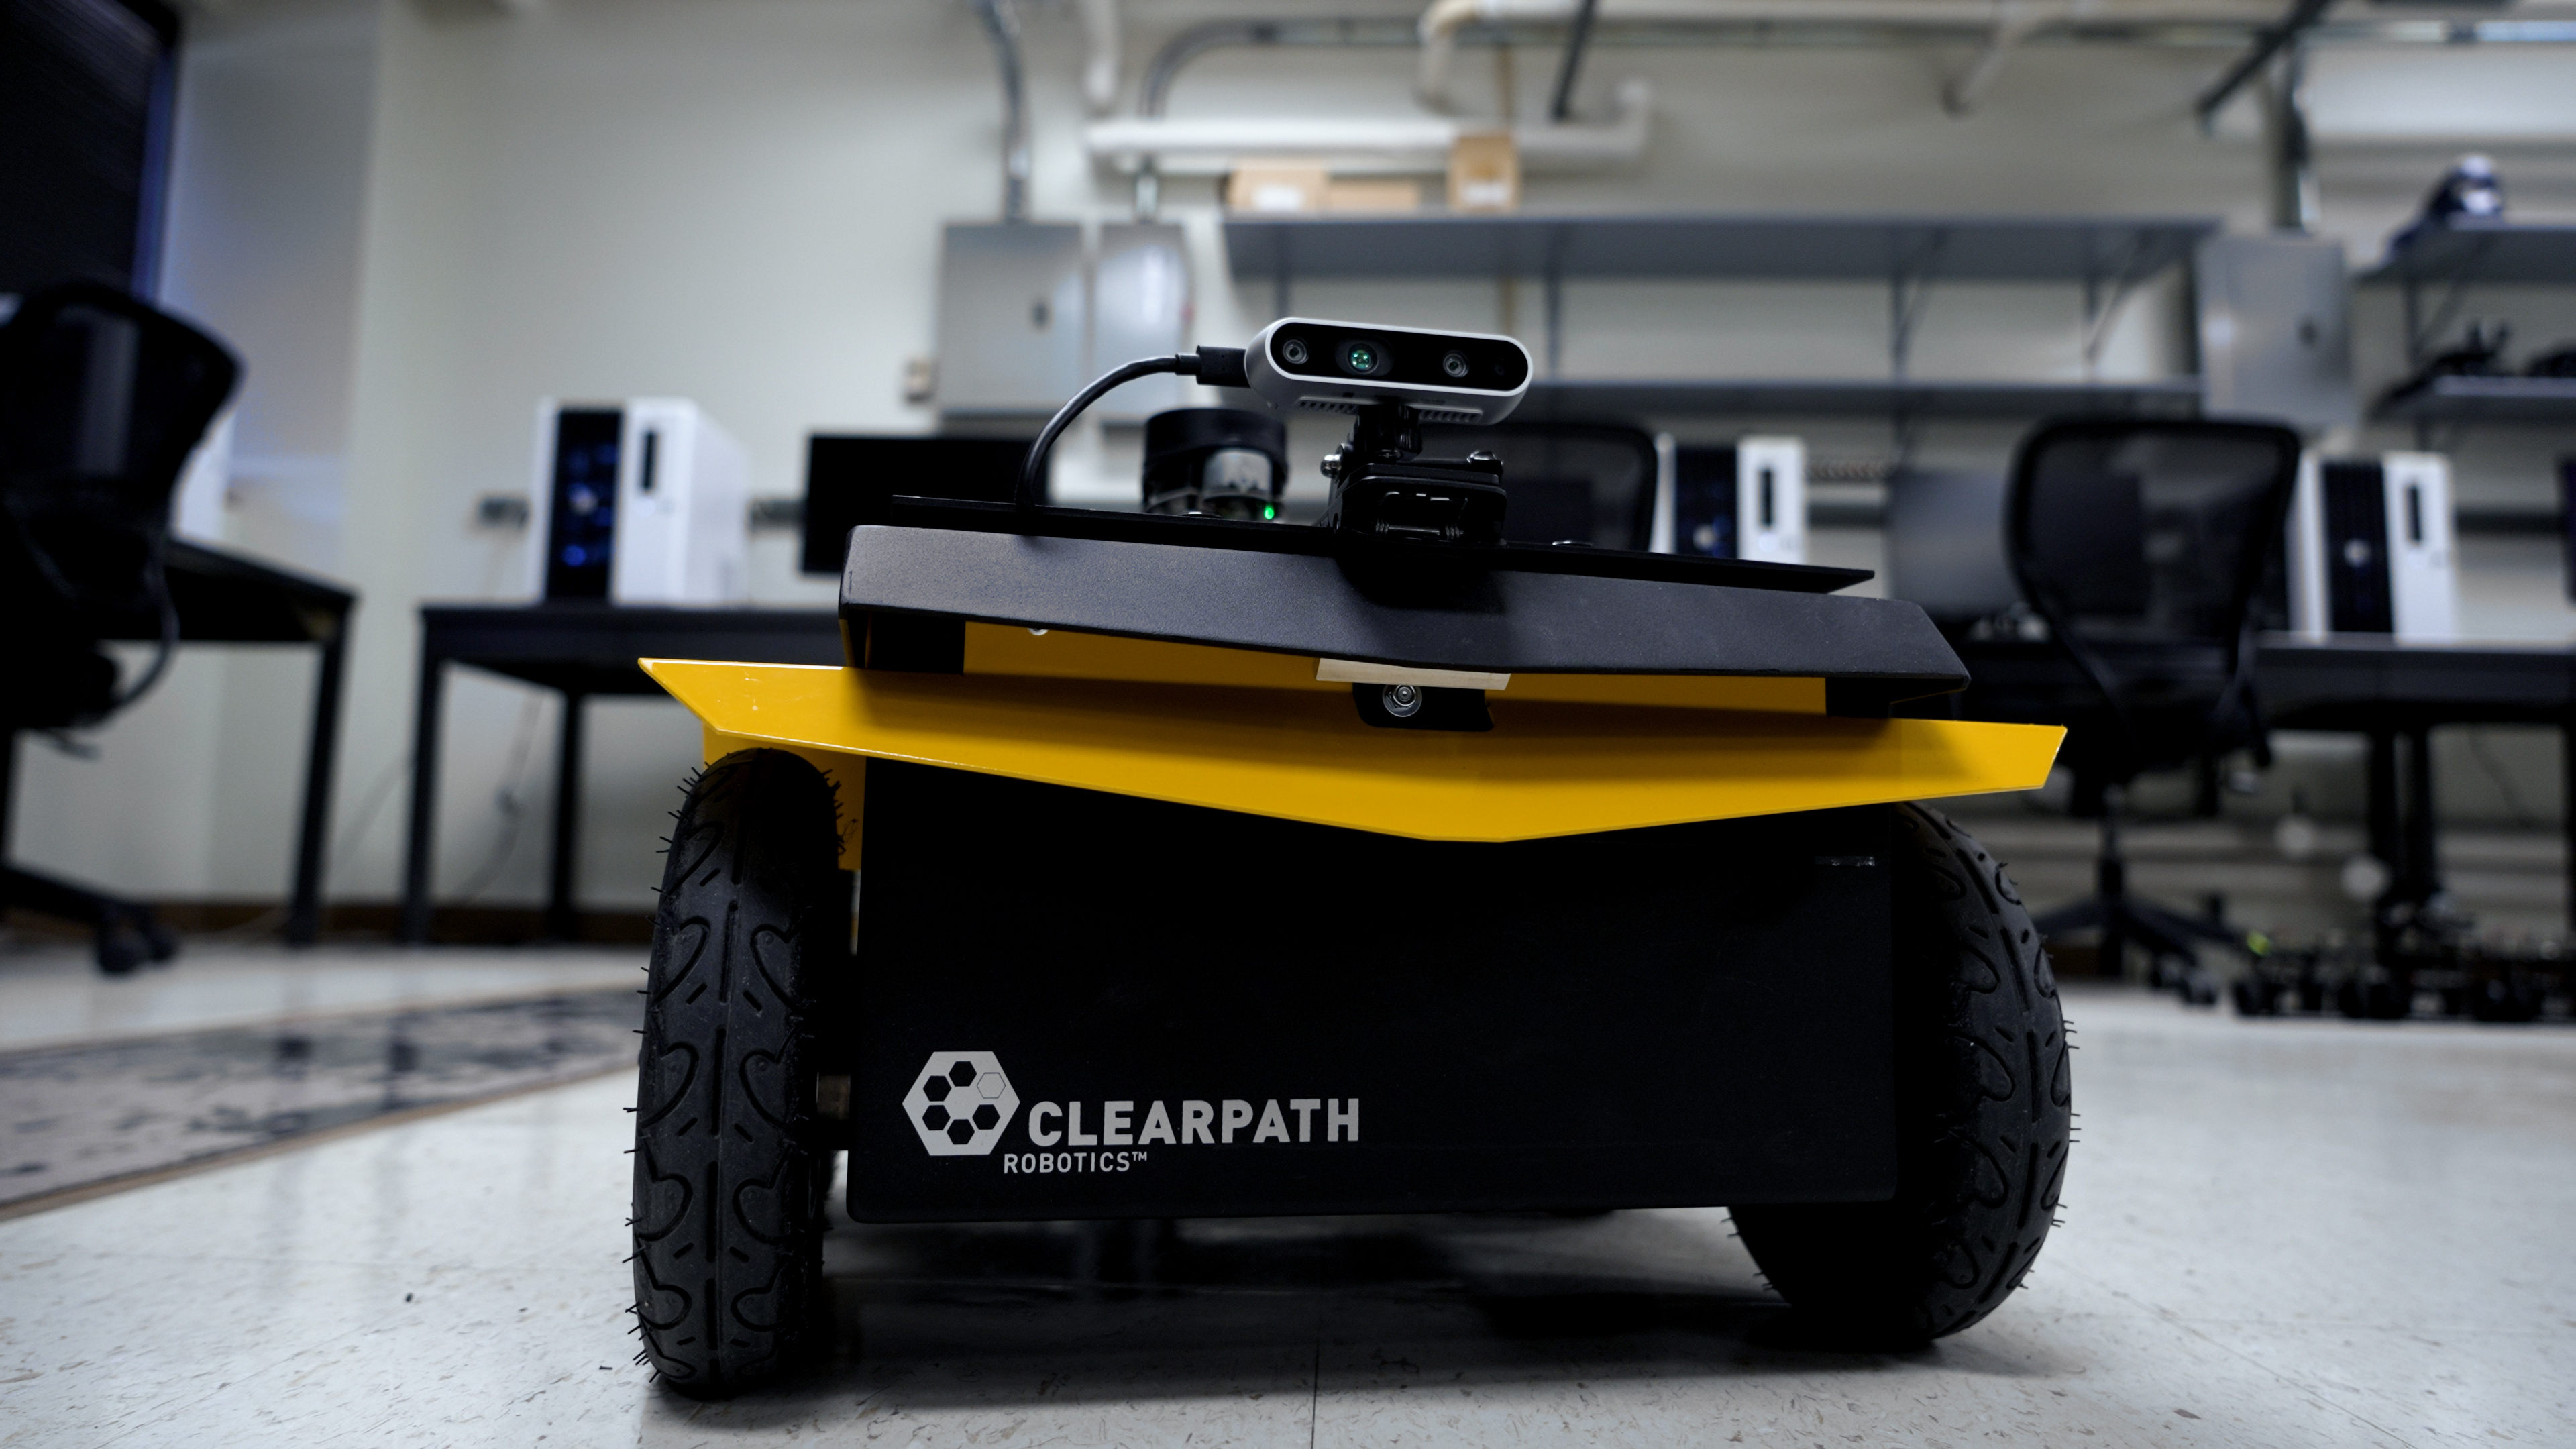 Clearpath Robotics robot with front-mounted camera